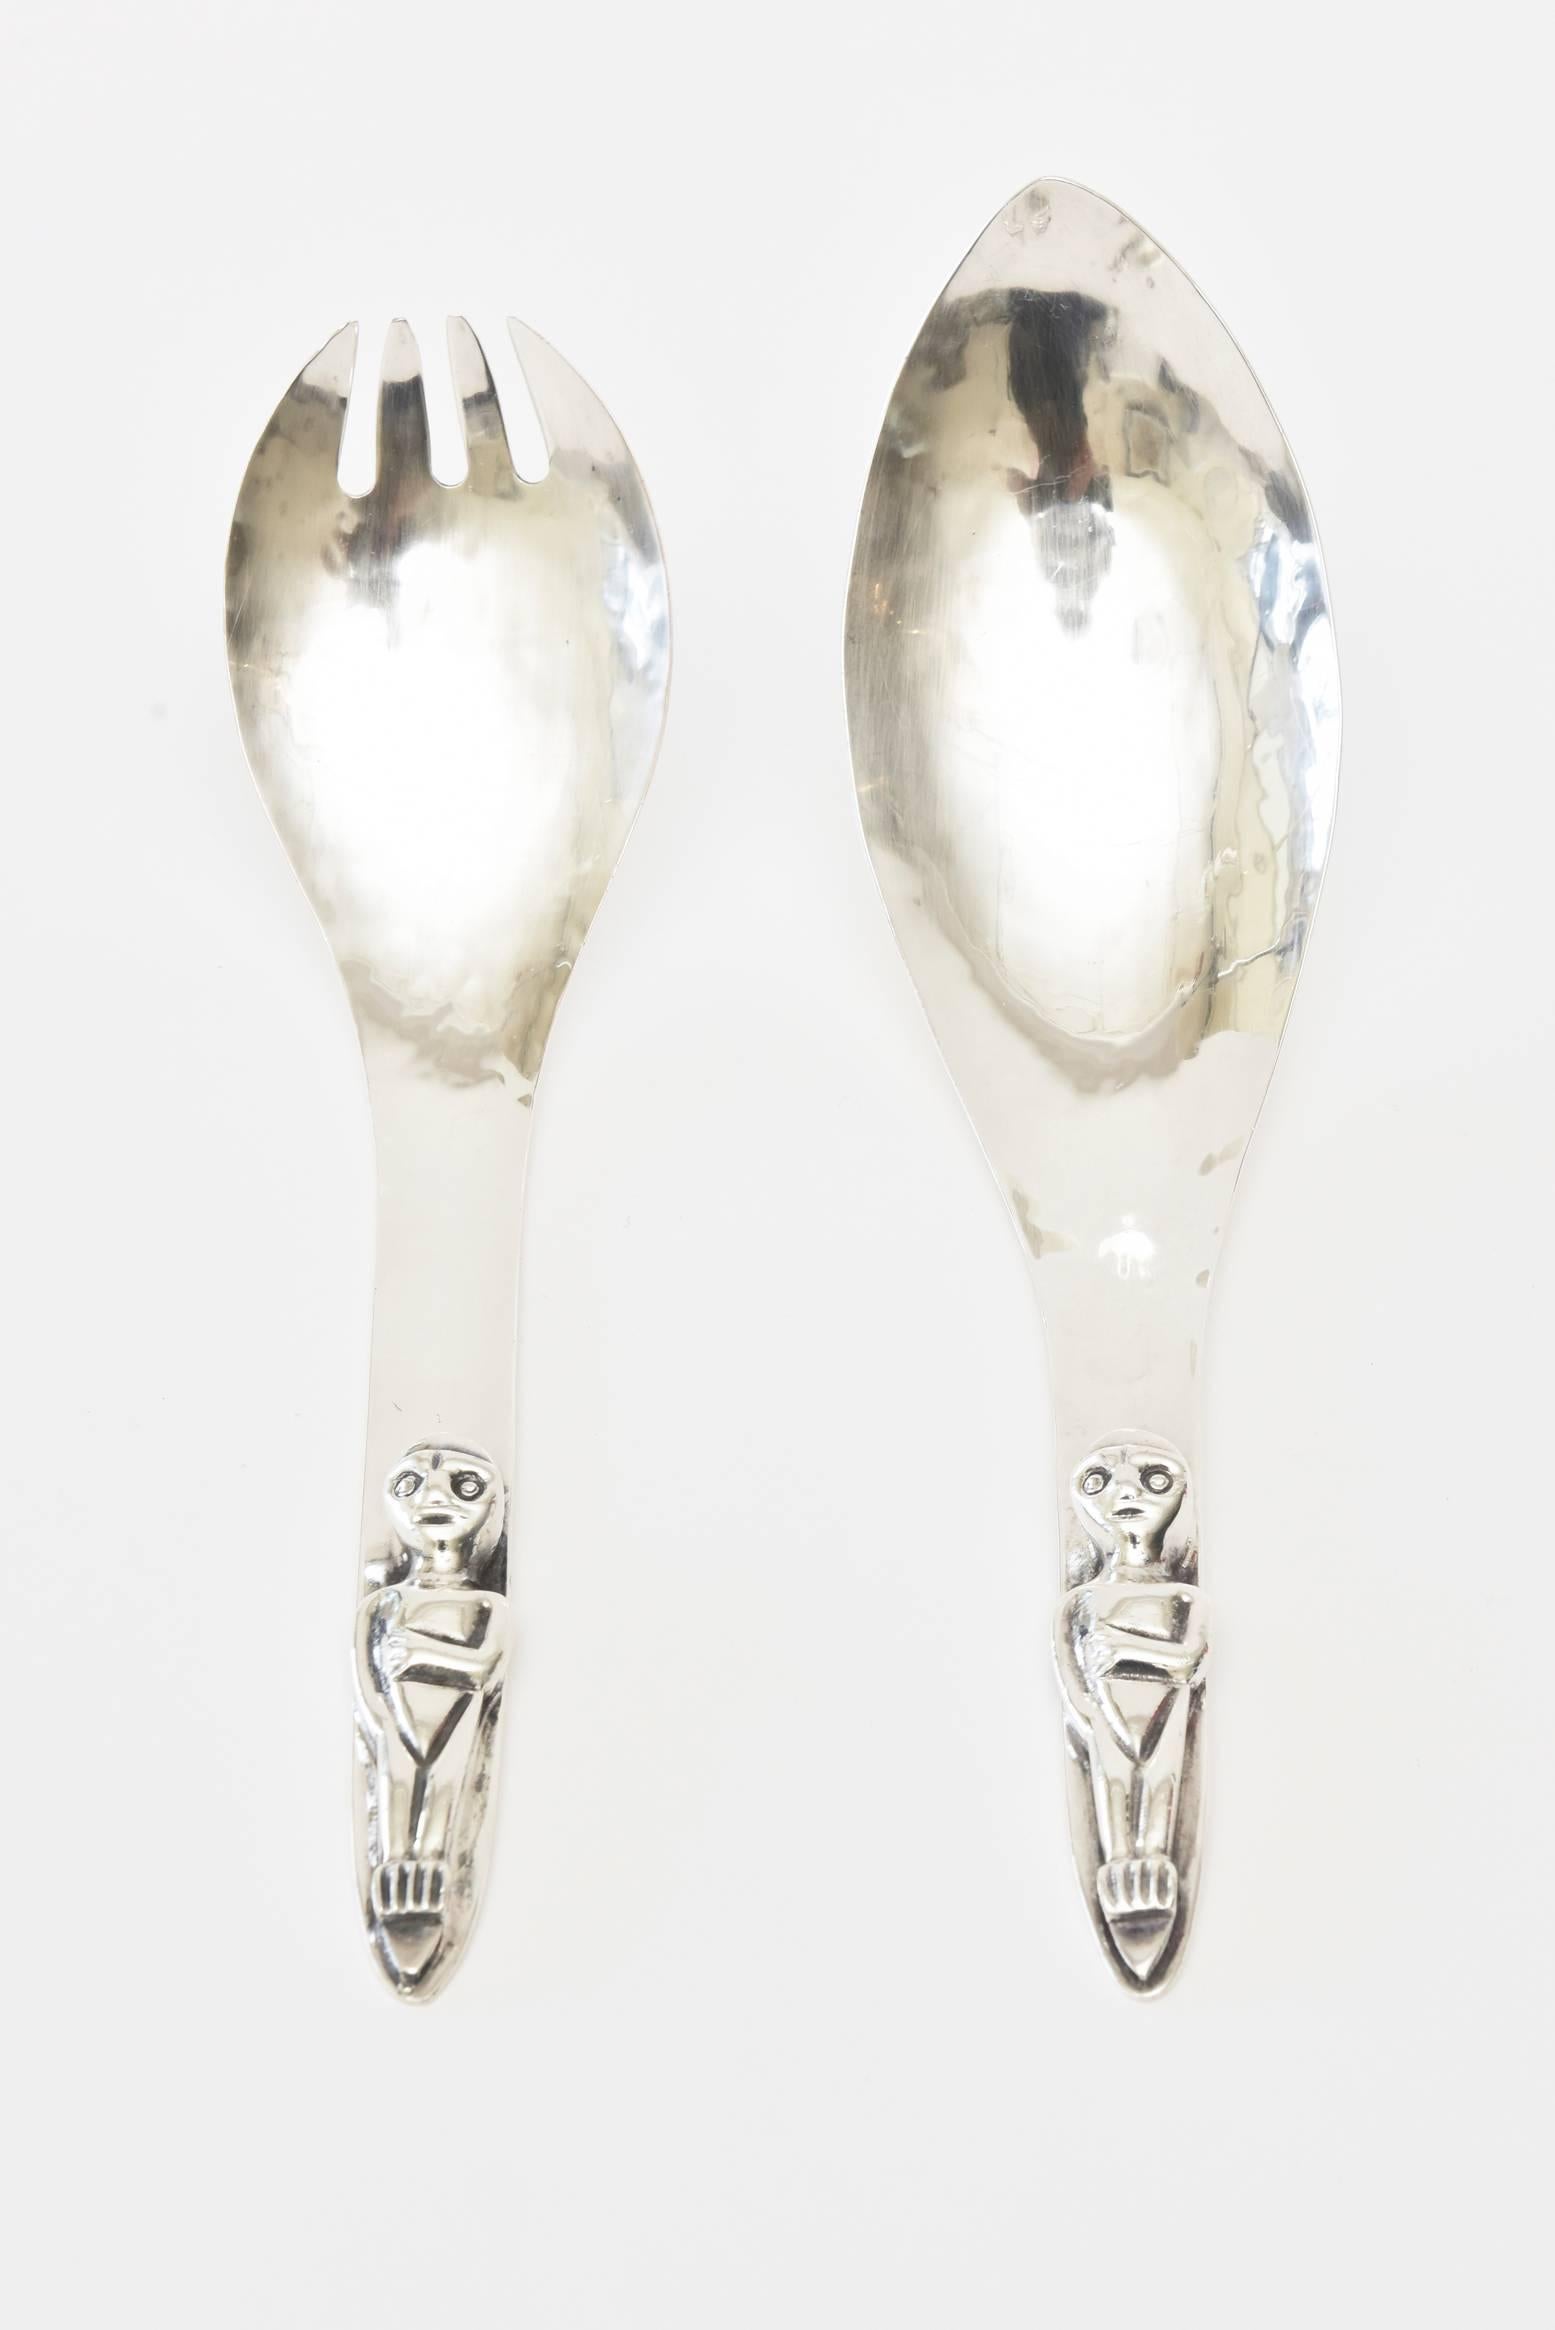 These amazing and sculptural hallmarked hand wrought silver plate serving pieces or salad utensils are like a work of art. These are perfect for serving and would make a lovely and unusual gift as well. They can be used for anything. Very